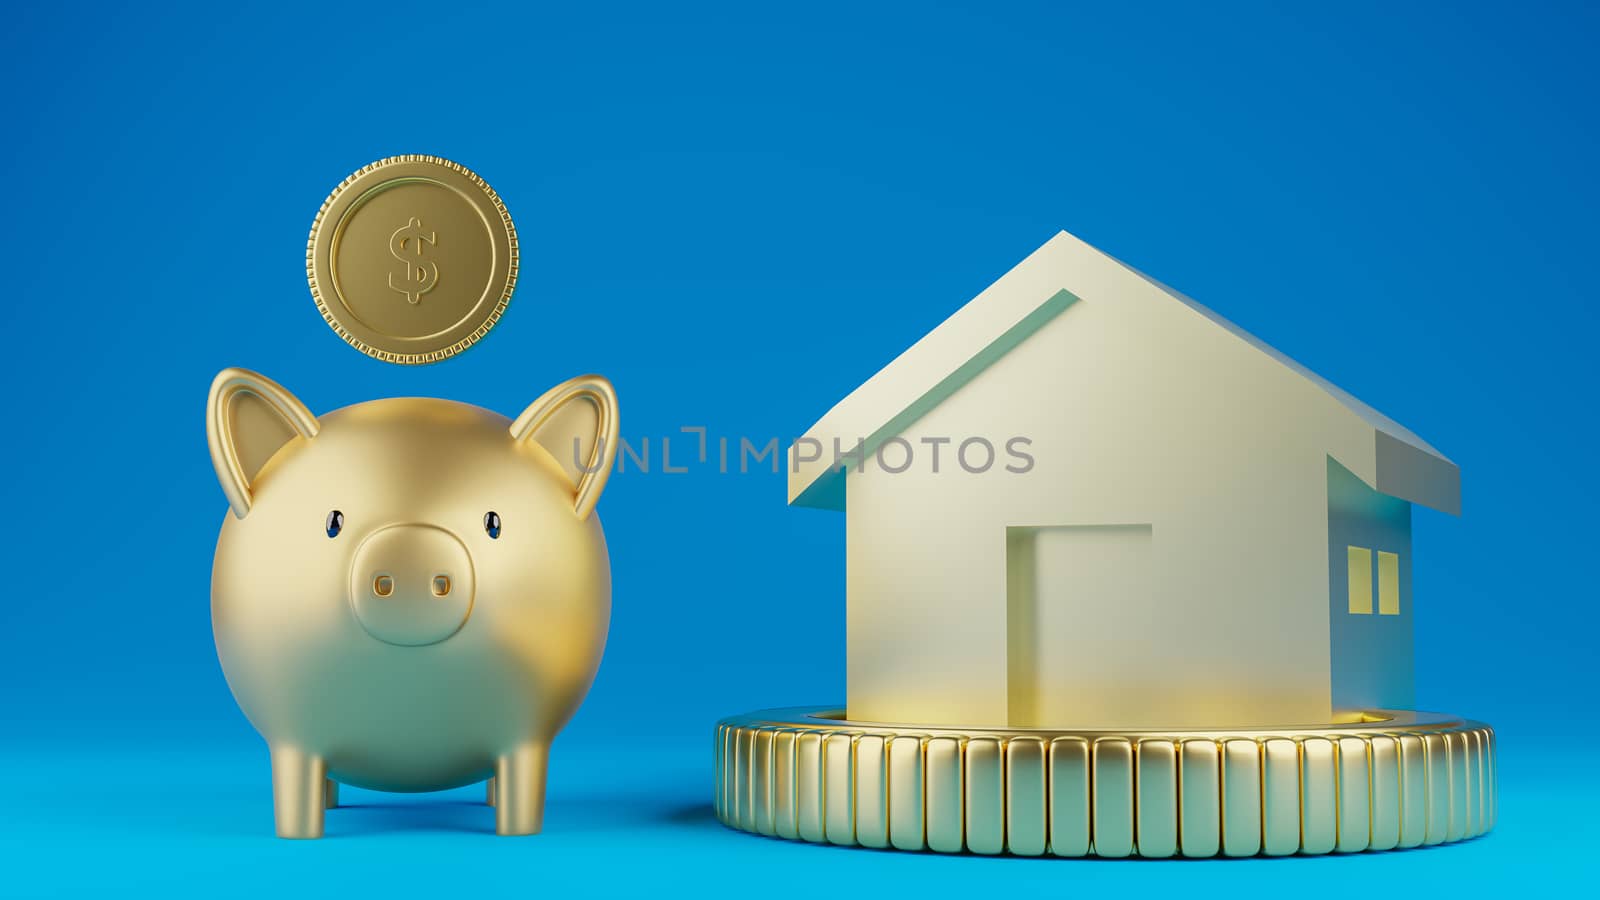 3d rendered illustration of a gold piggy bank with a model house on a large coin. Blue color background. Saving, business, and finance concept.